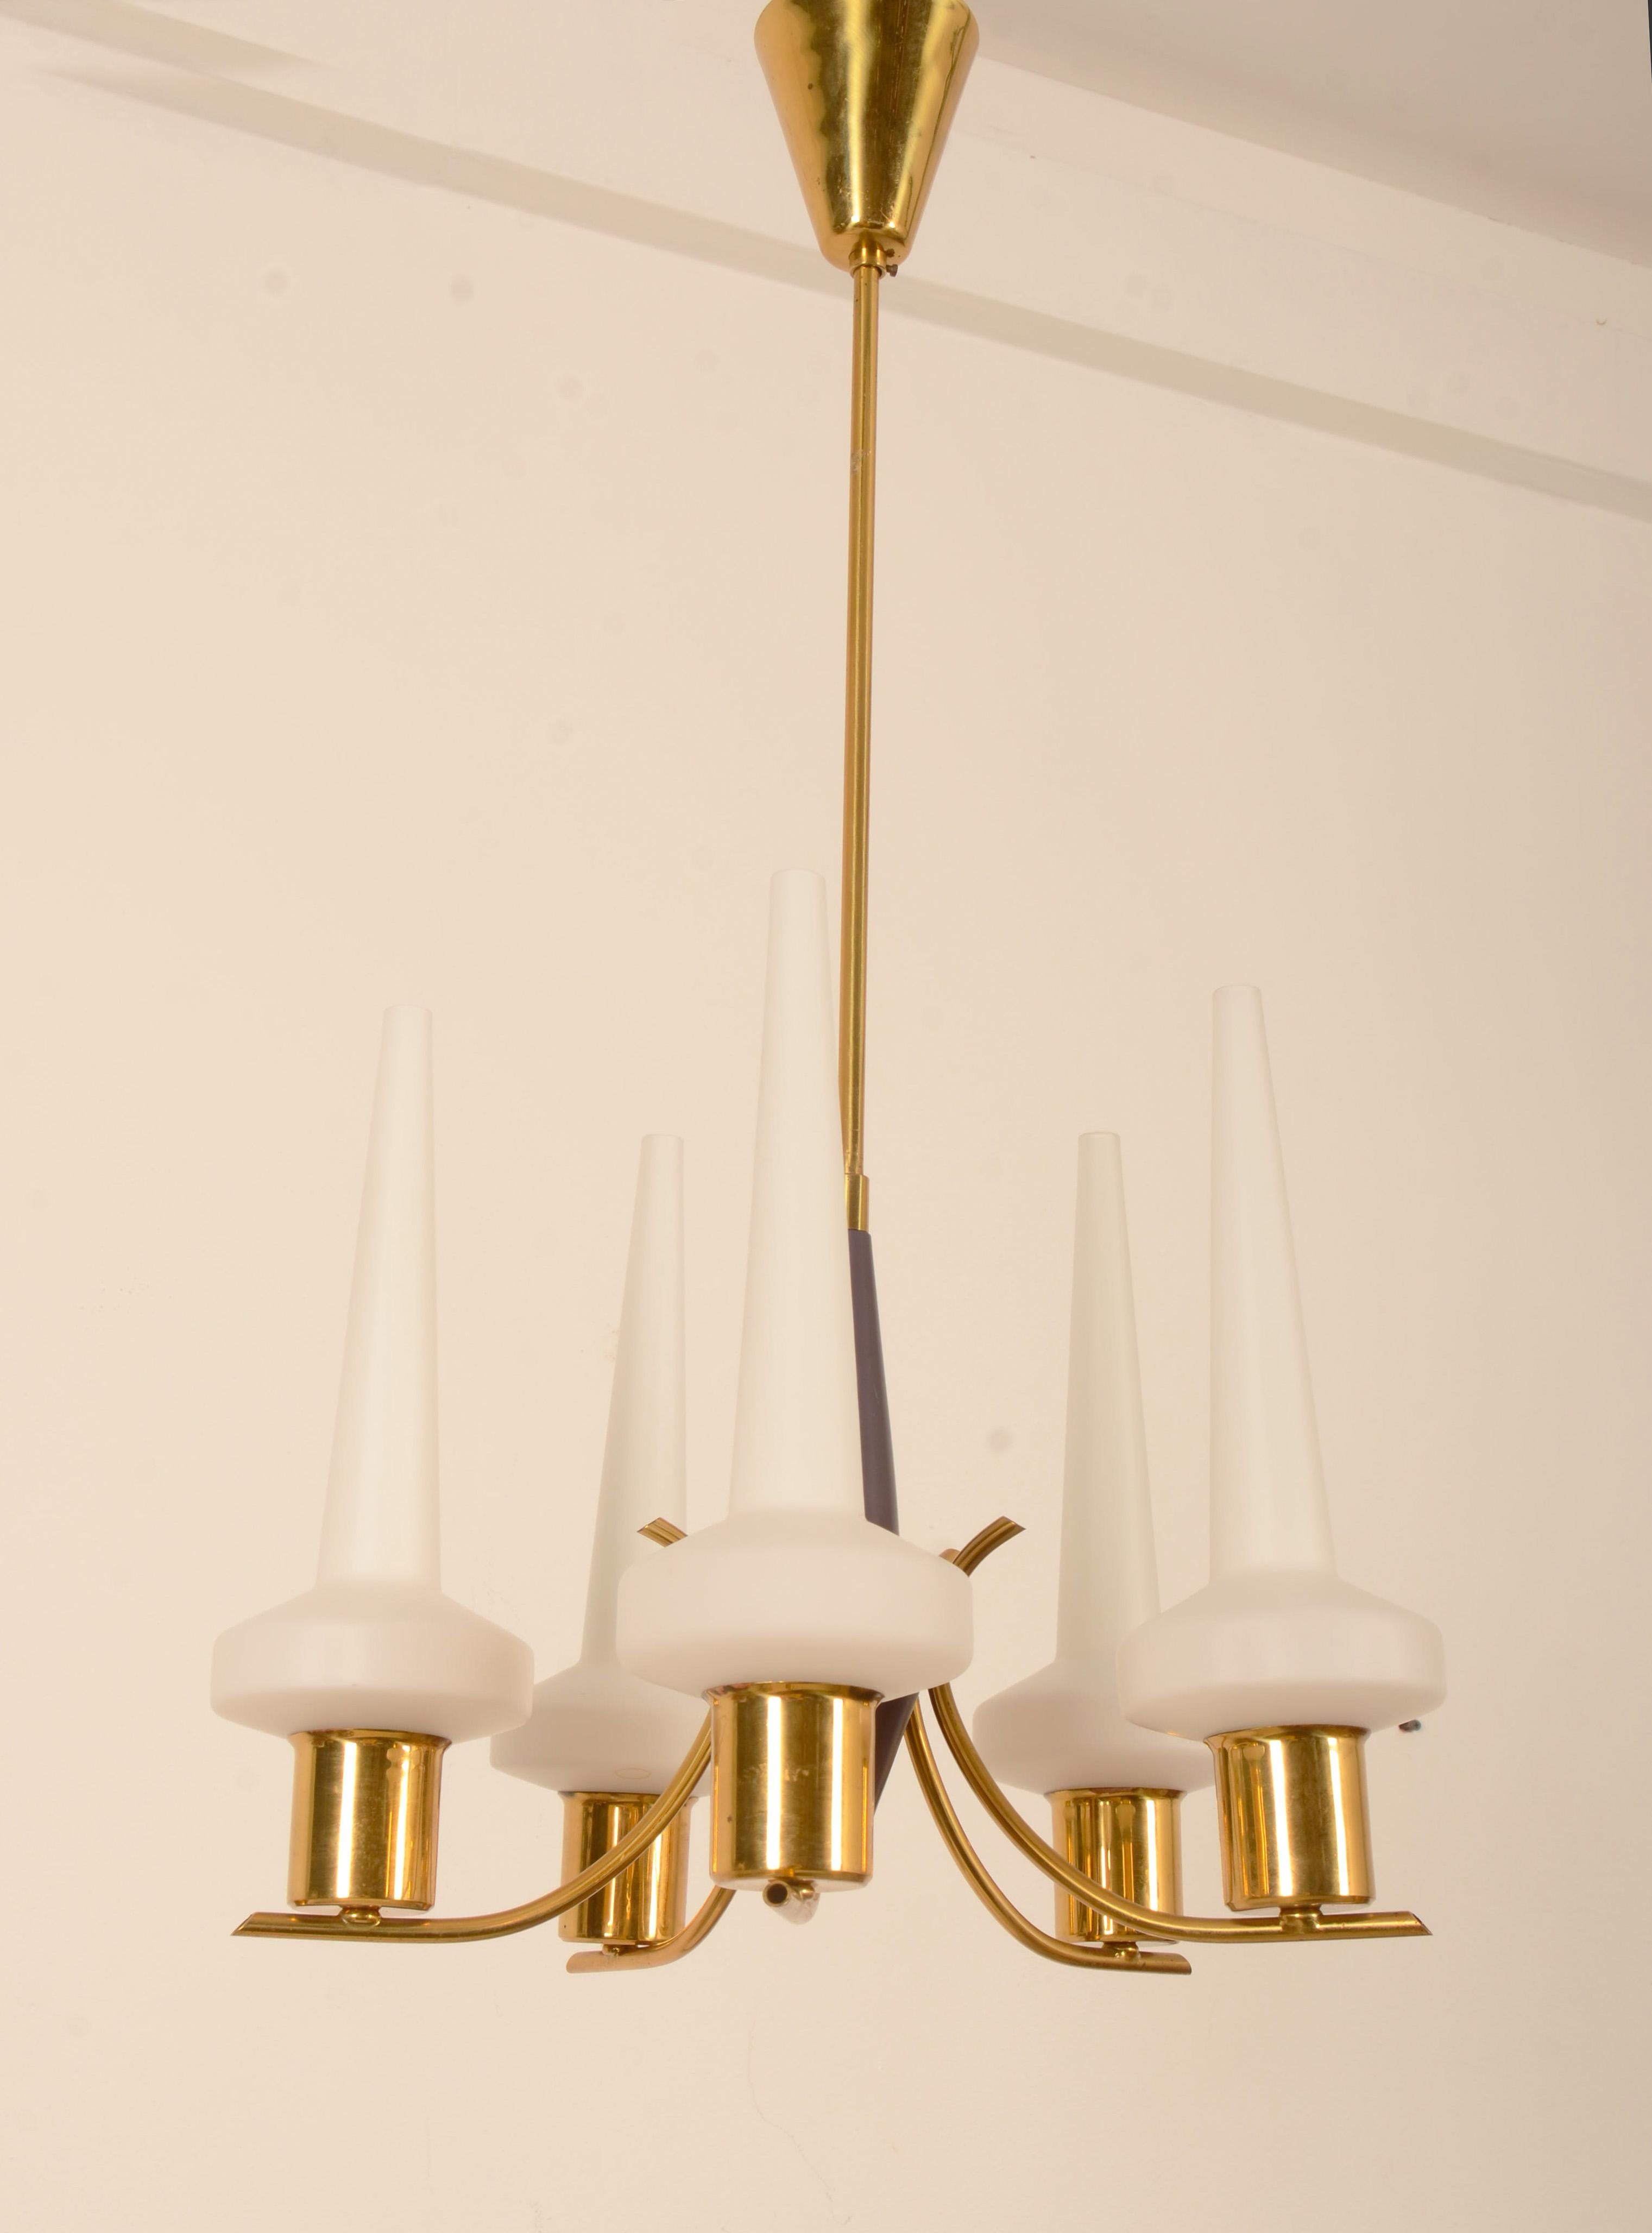 Mid-20th Century Danish Opaline Glass Chandelier From The Late 1950s For Sale